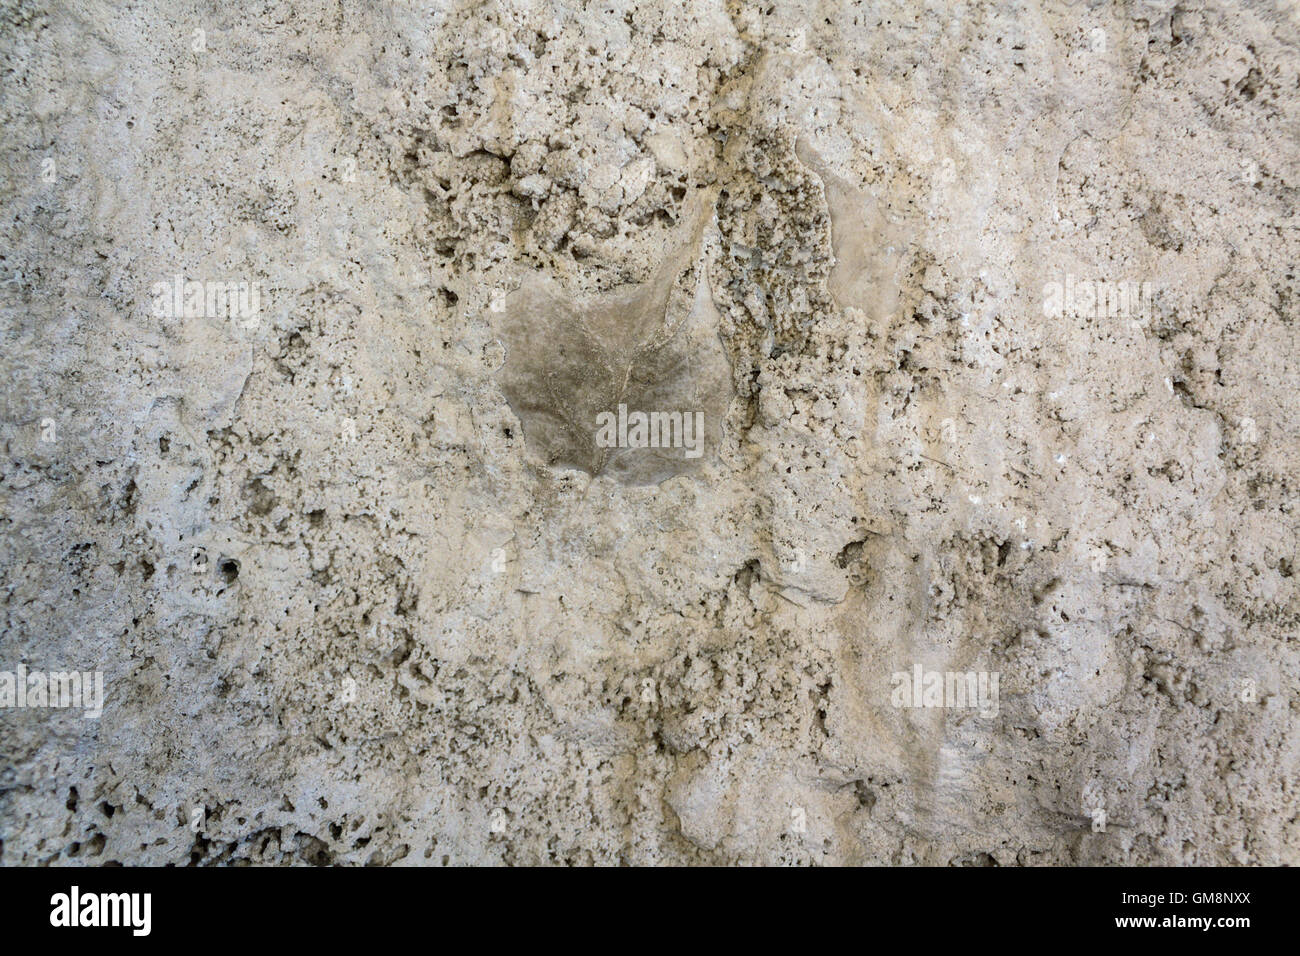 The Imprint leaf on cement floor background Stock Photo